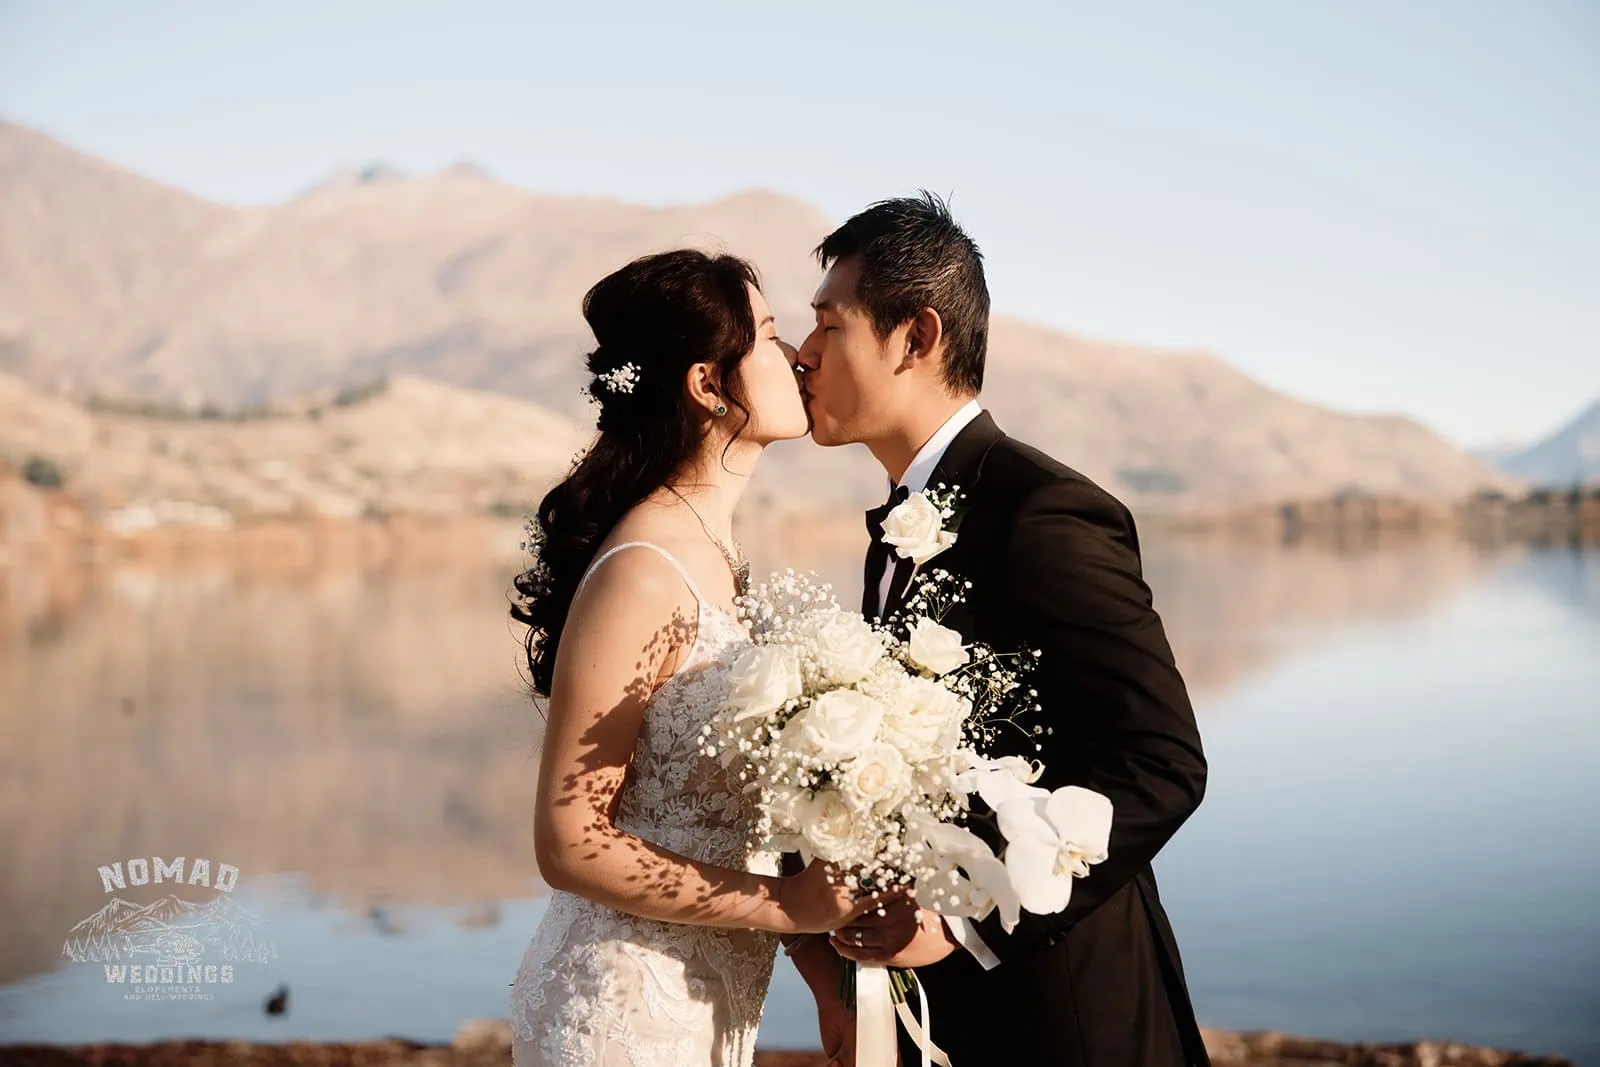 Connie and Andrew share a romantic kiss during their Remarkables Heli pre wedding shoot near a breathtaking lake.